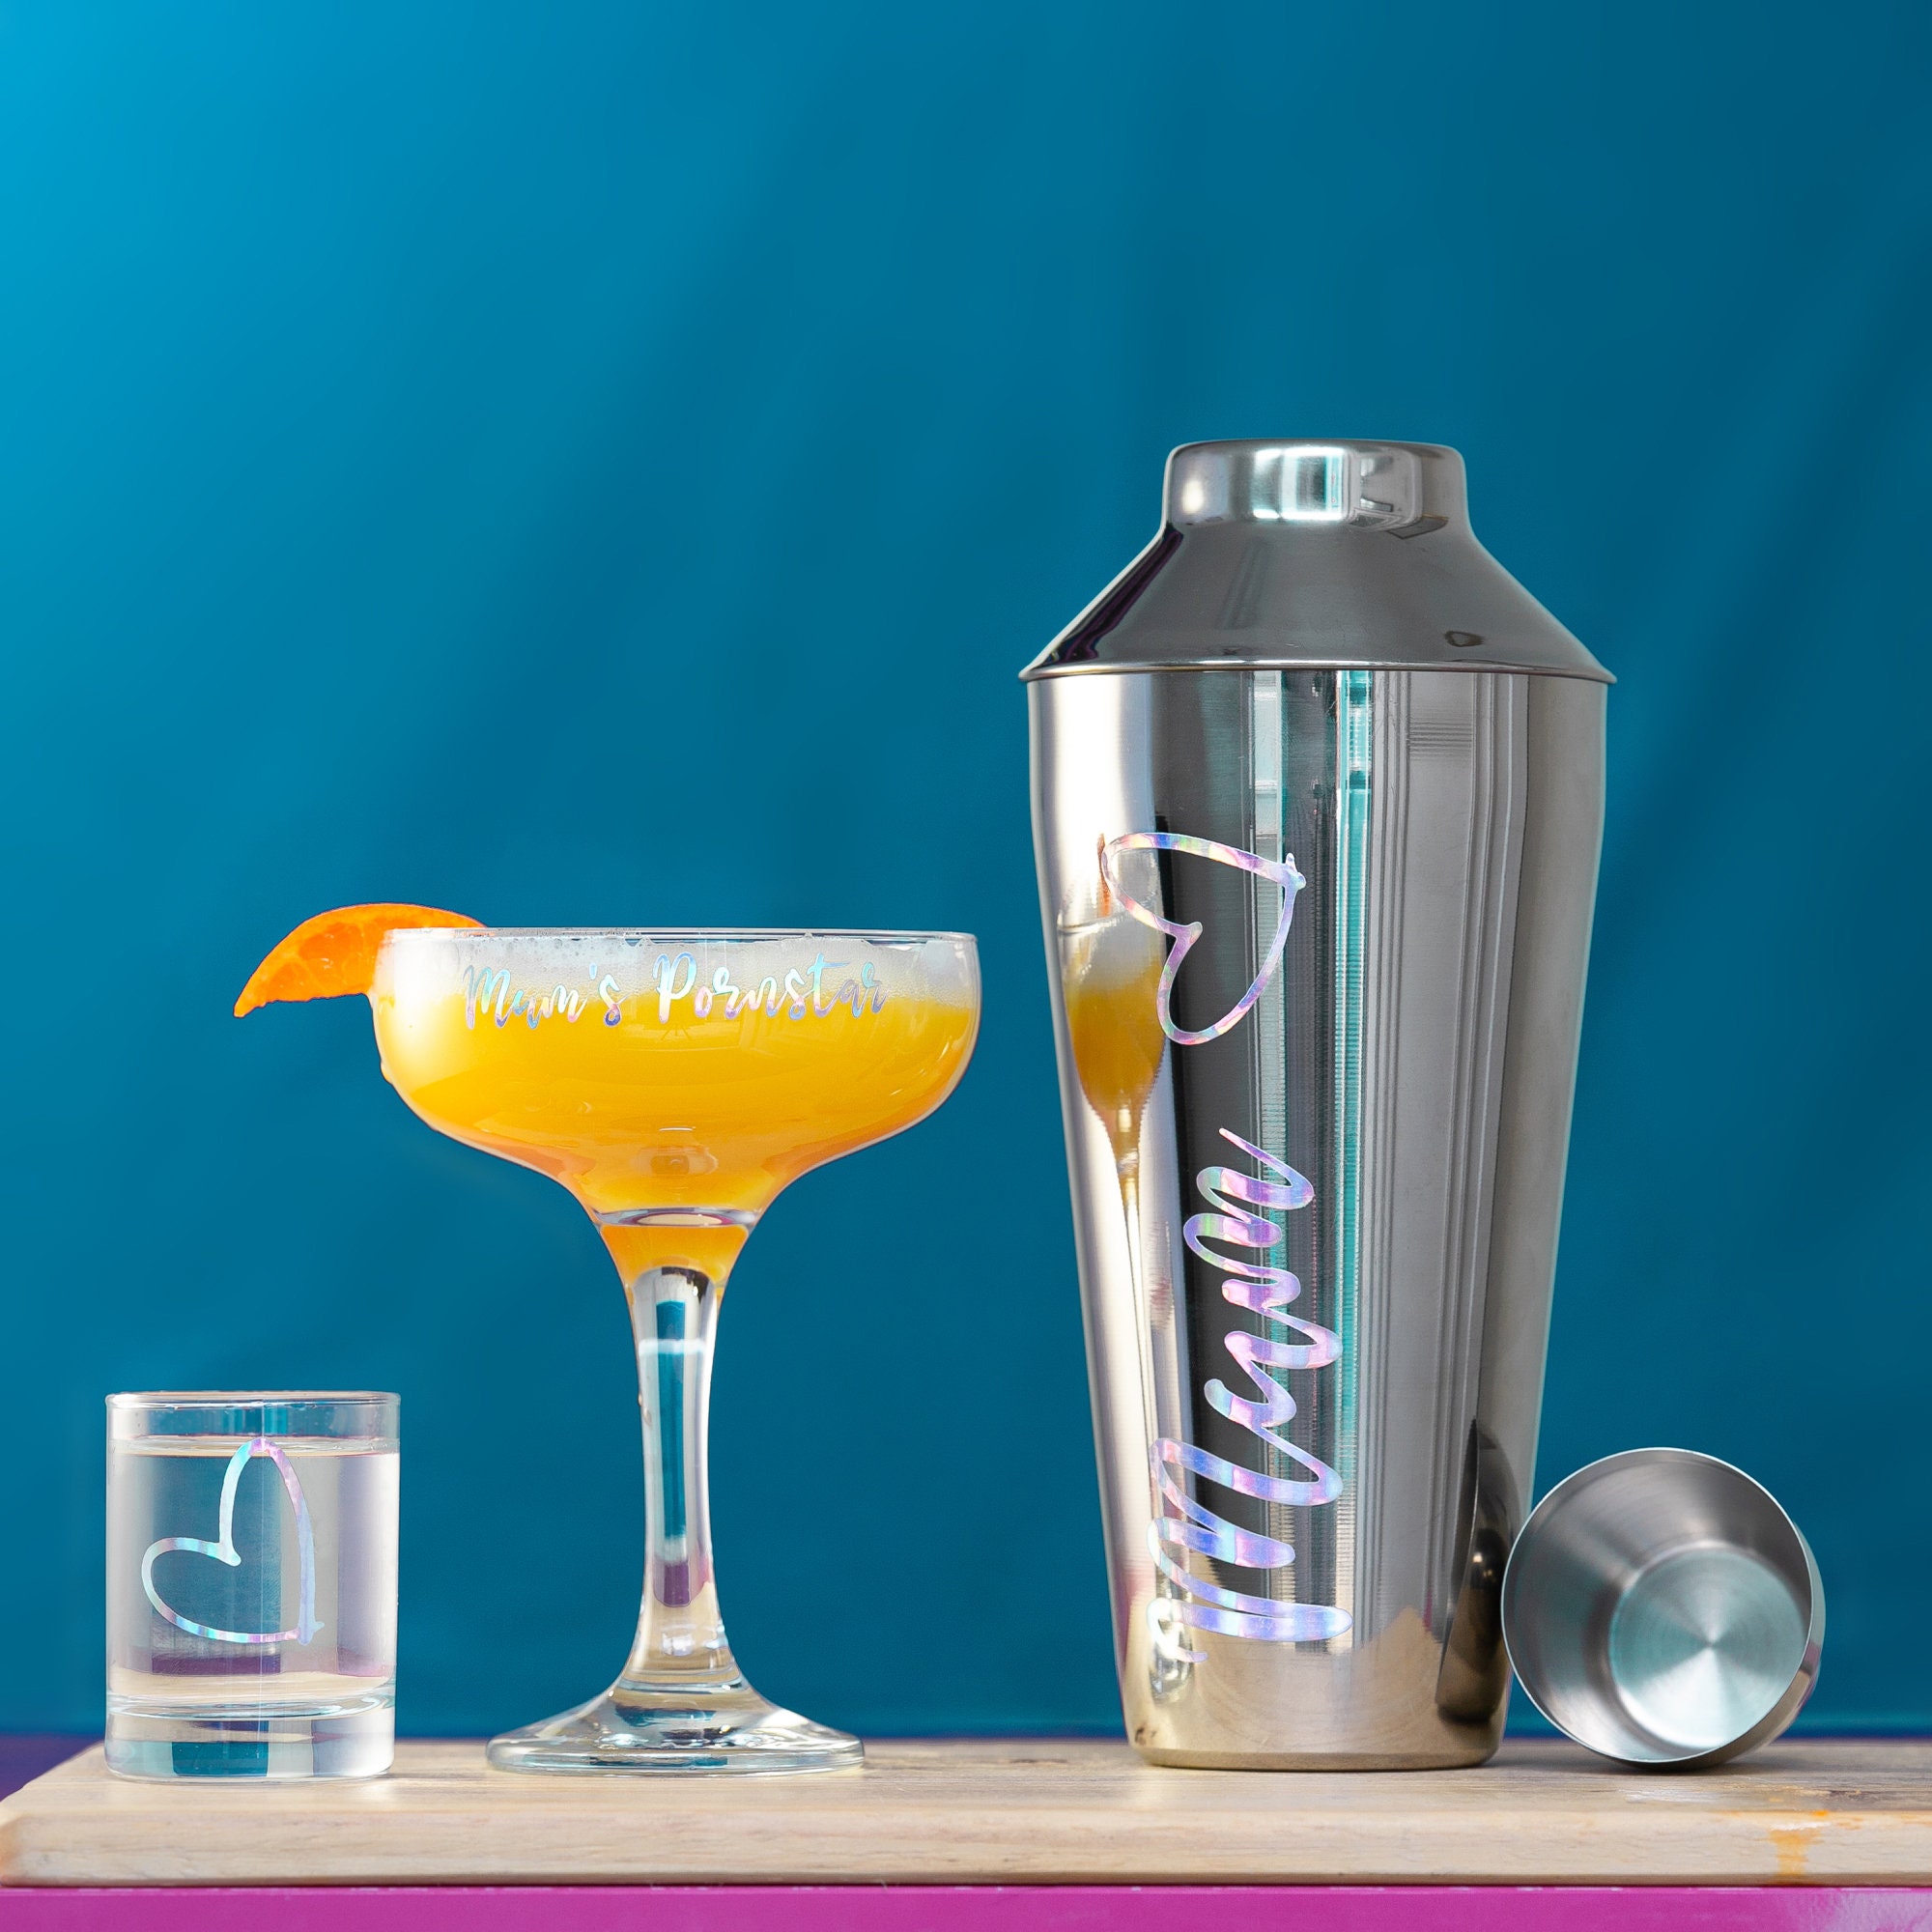 Cocktail Shaker Cup - Innovative Marketing Consultants